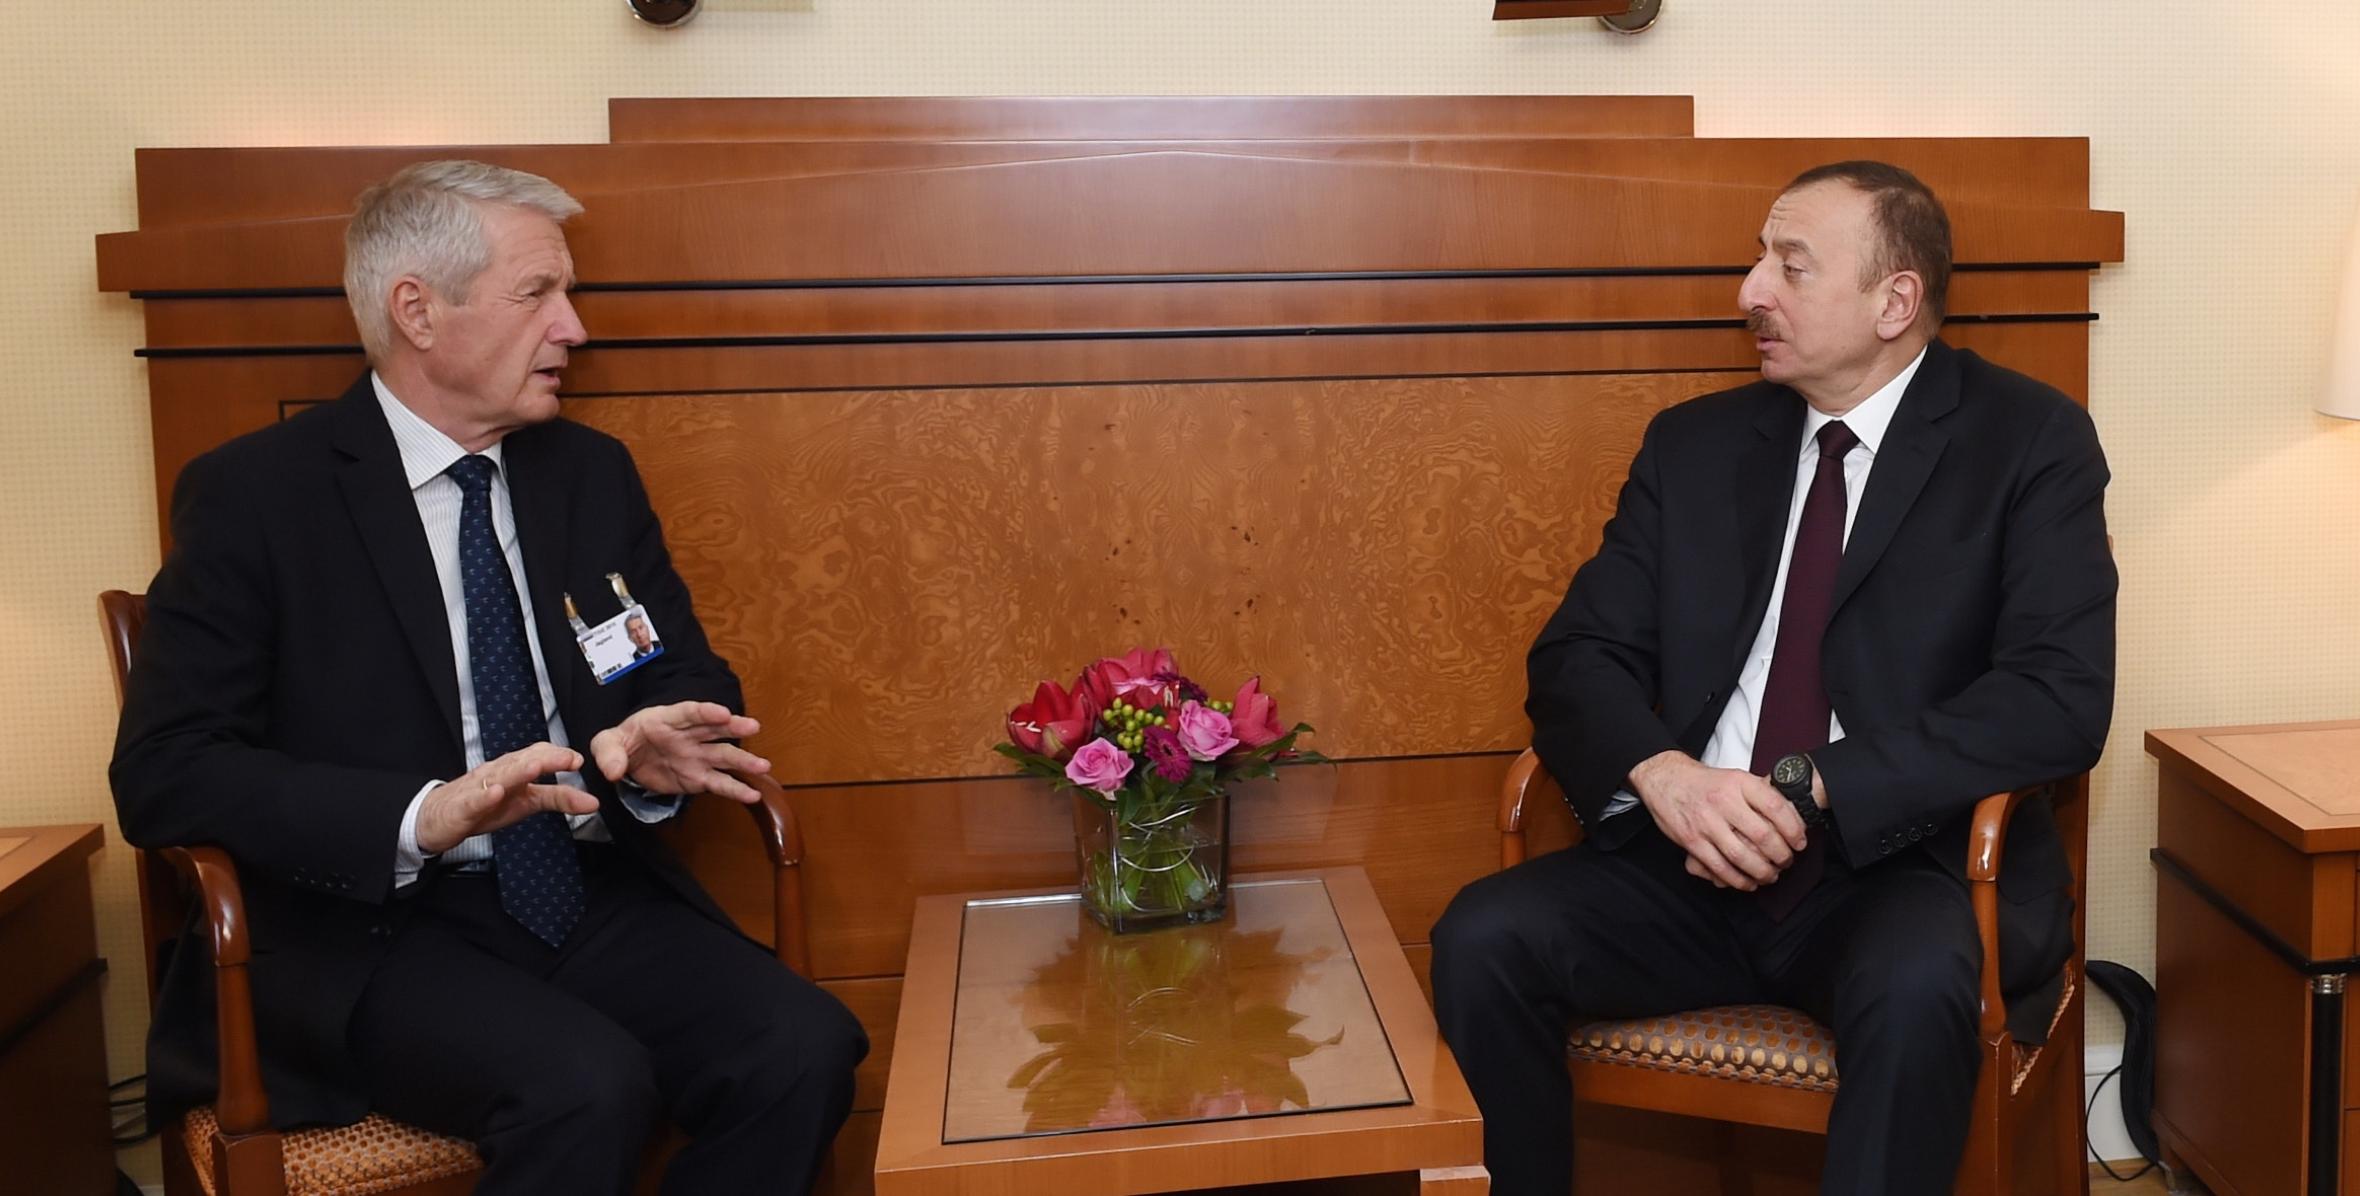 Ilham Aliyev met with Secretary General of the Council of Europe Thorbjorn Jagland in Munich